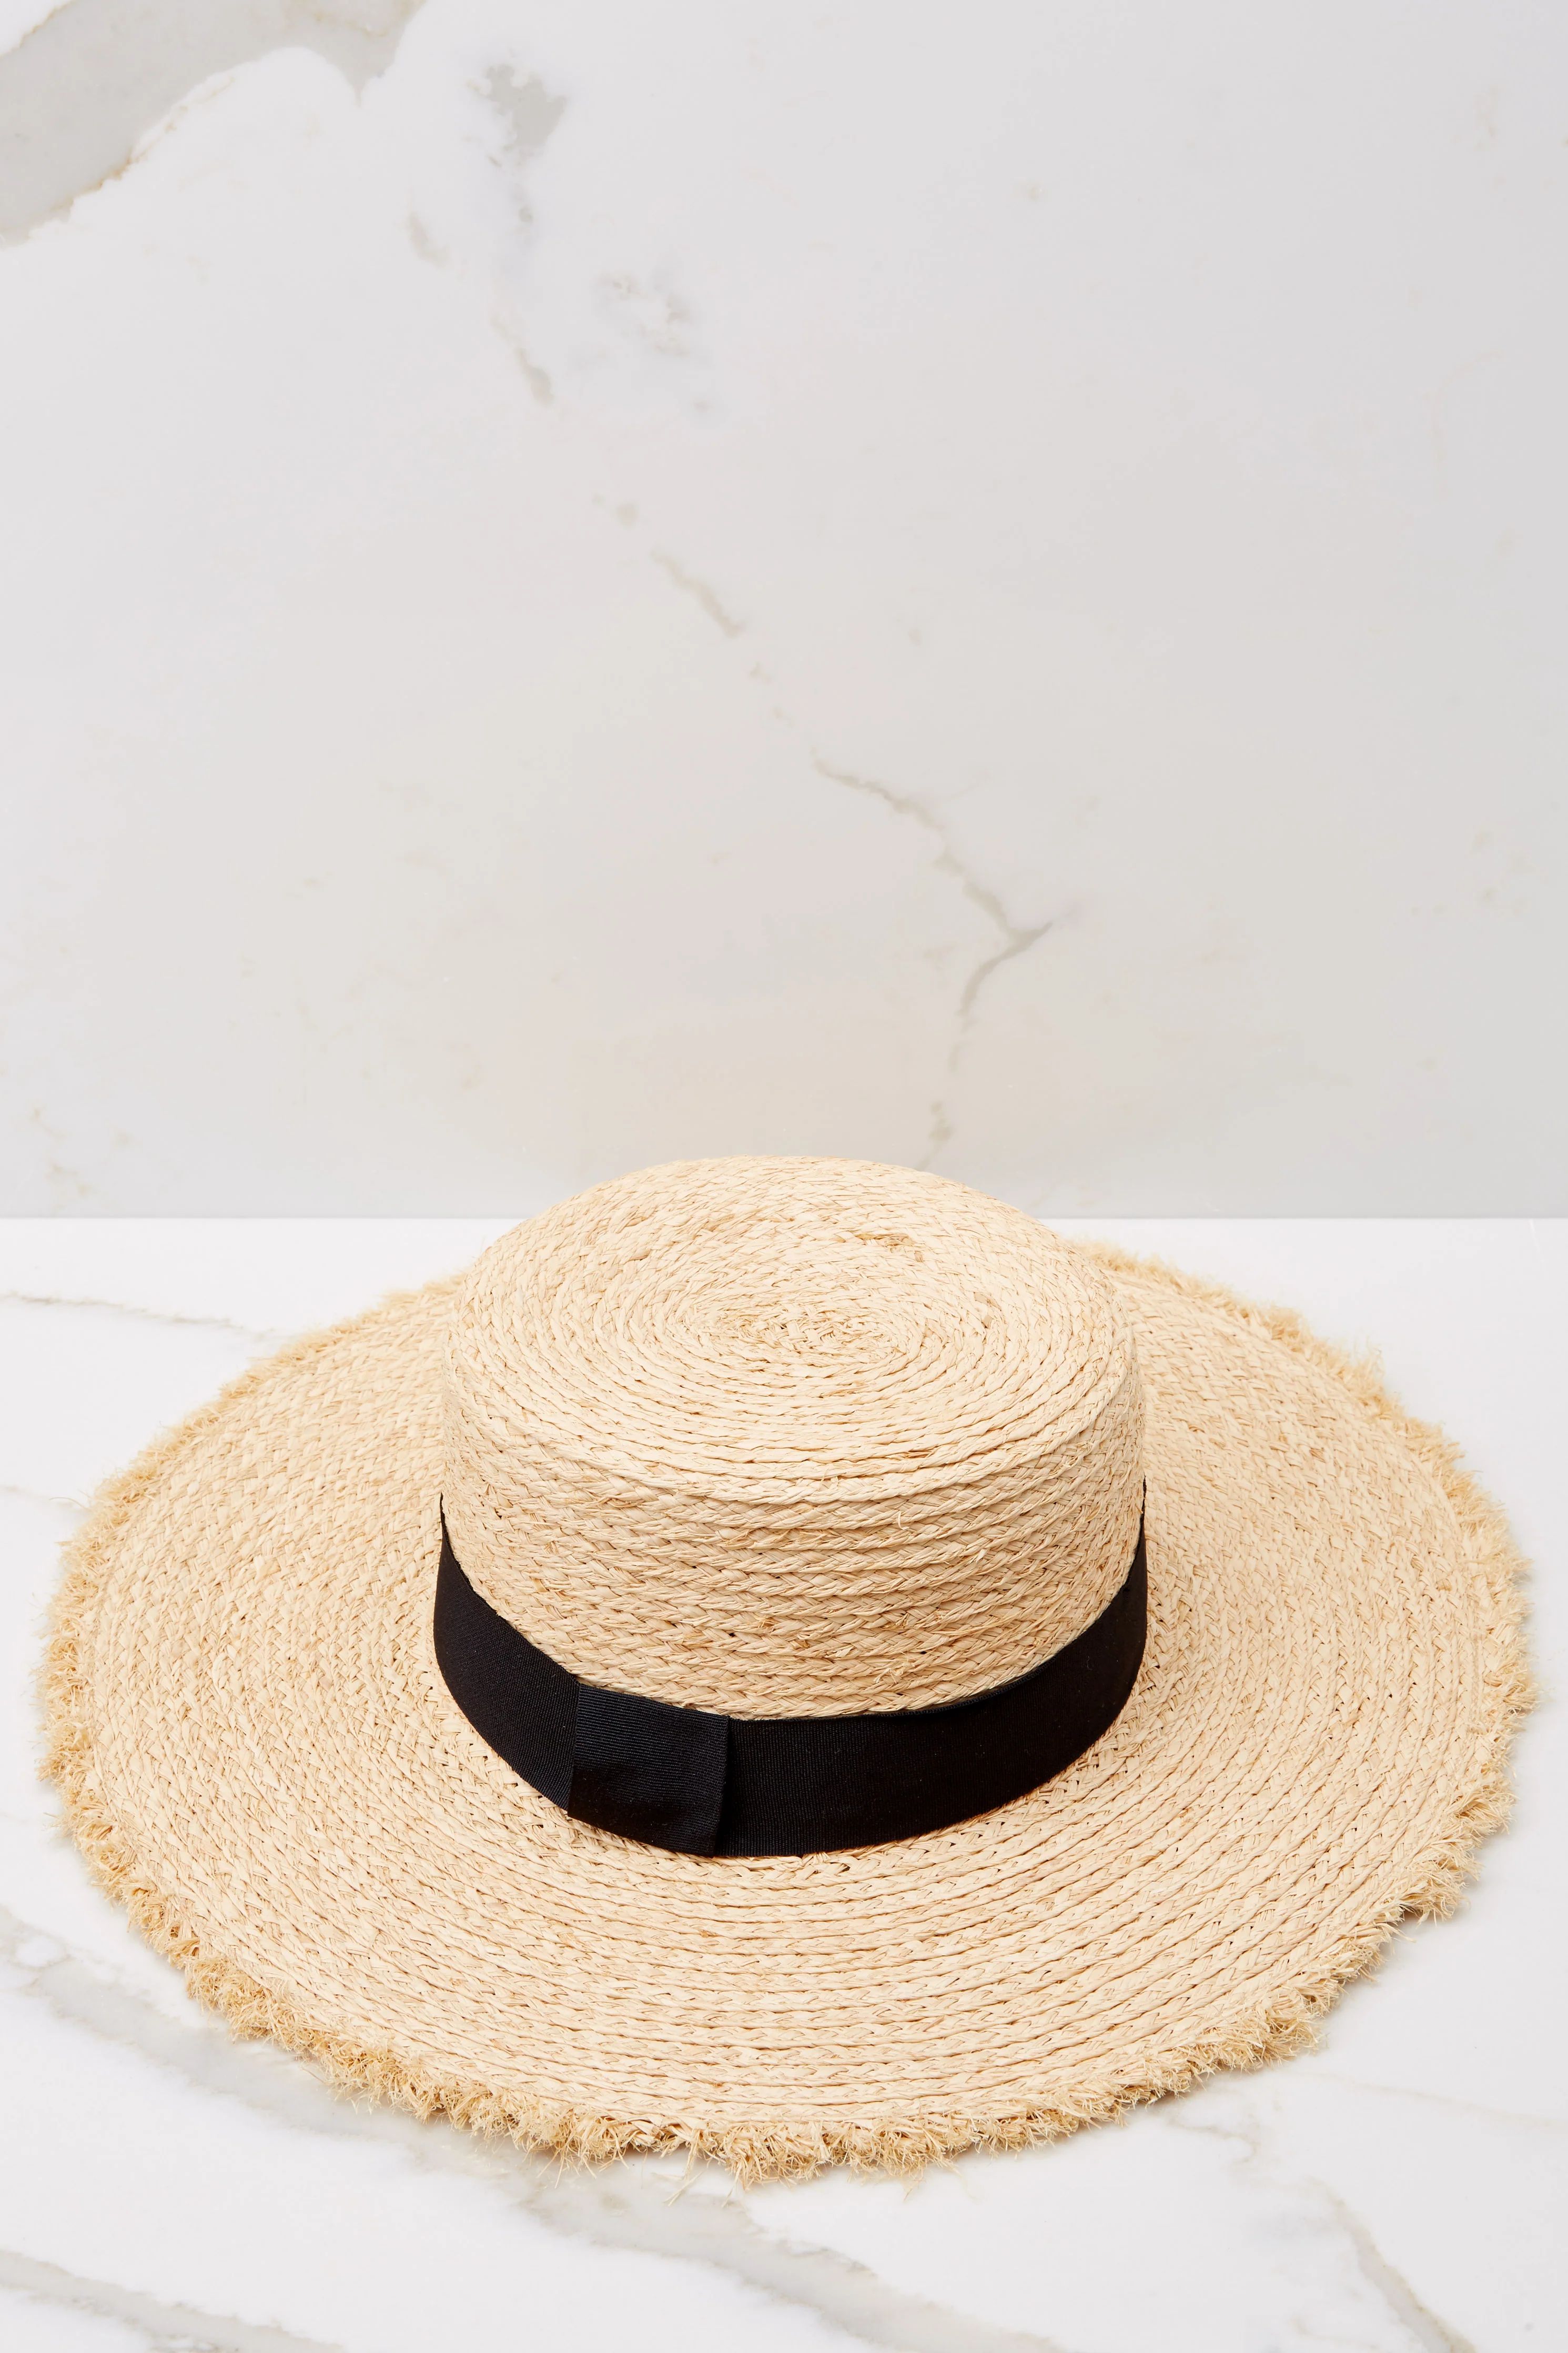 Take A Holiday Natural Hat | Red Dress 